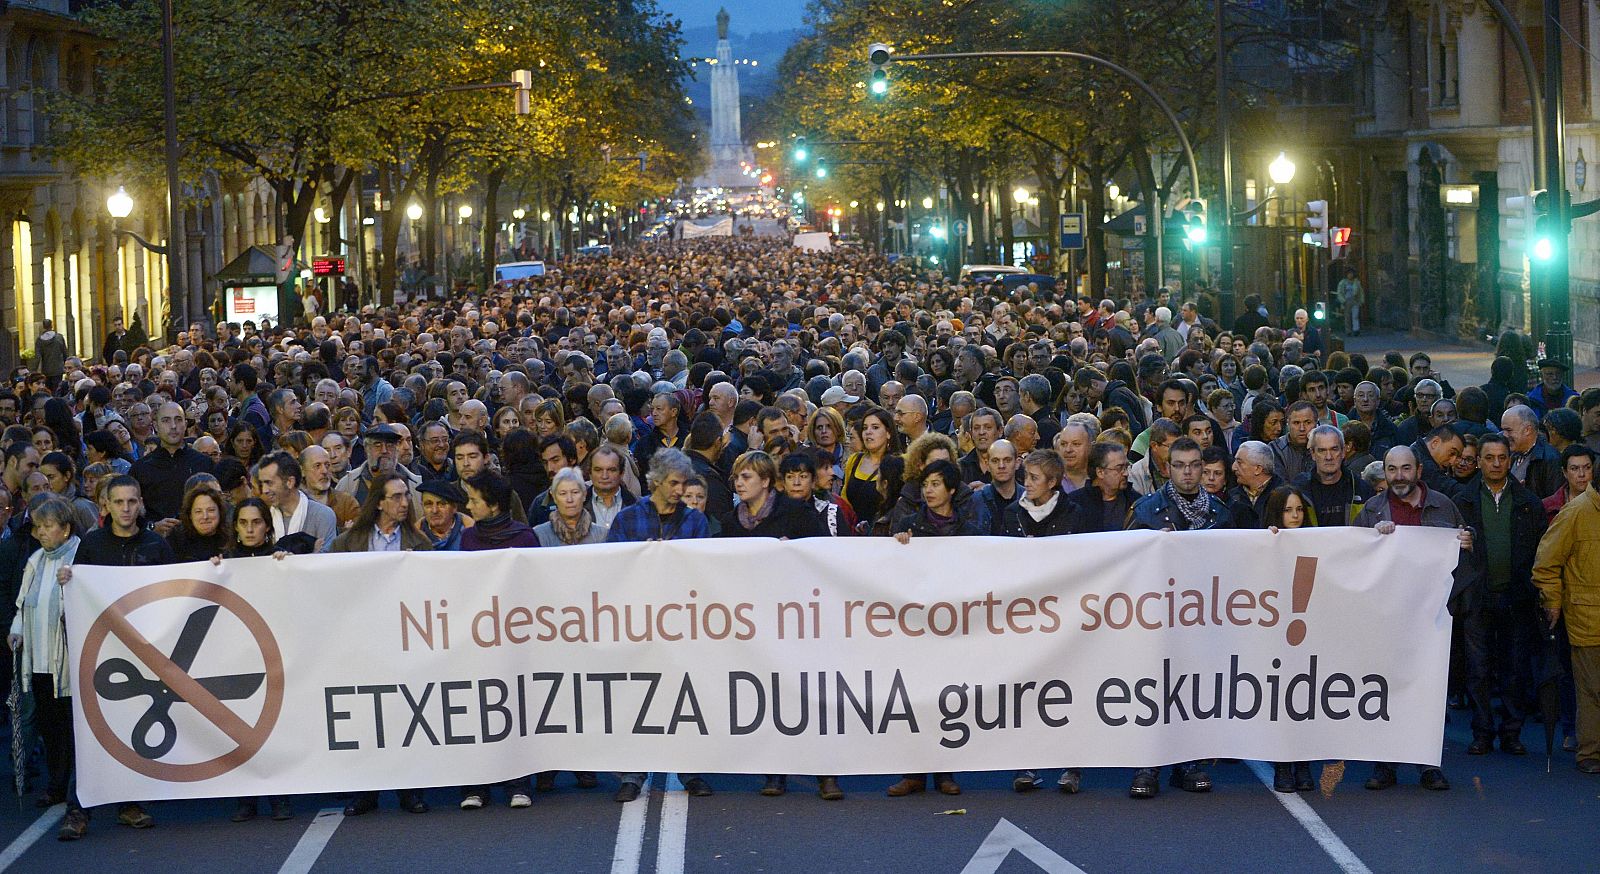 Thousands of demonstrators march behind a banner reading "Not Evictions, Nor Social Cuts. Housing Is A Right" during a protest against evictions in Bilbao